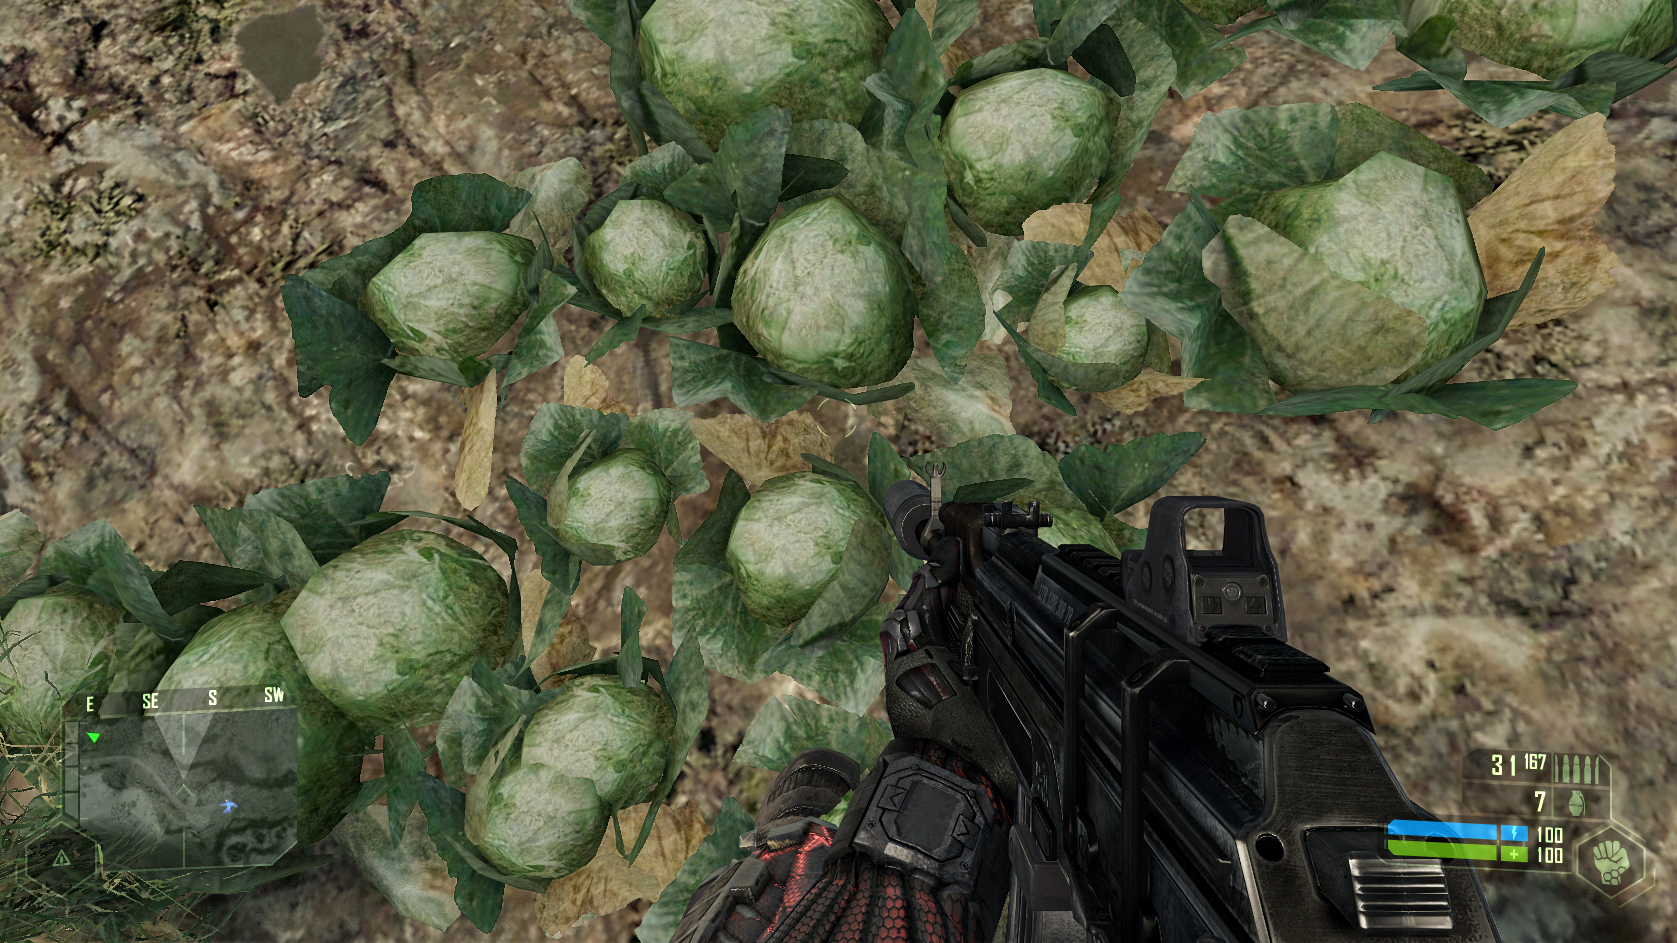 Crysis at 1080p with the graphics maxed out (Ryzen 7 2700X, GTX 1080 Ti). Doesn't that lettuce look good?! (Screenshot: Joanna Nelius (Gizmodo)